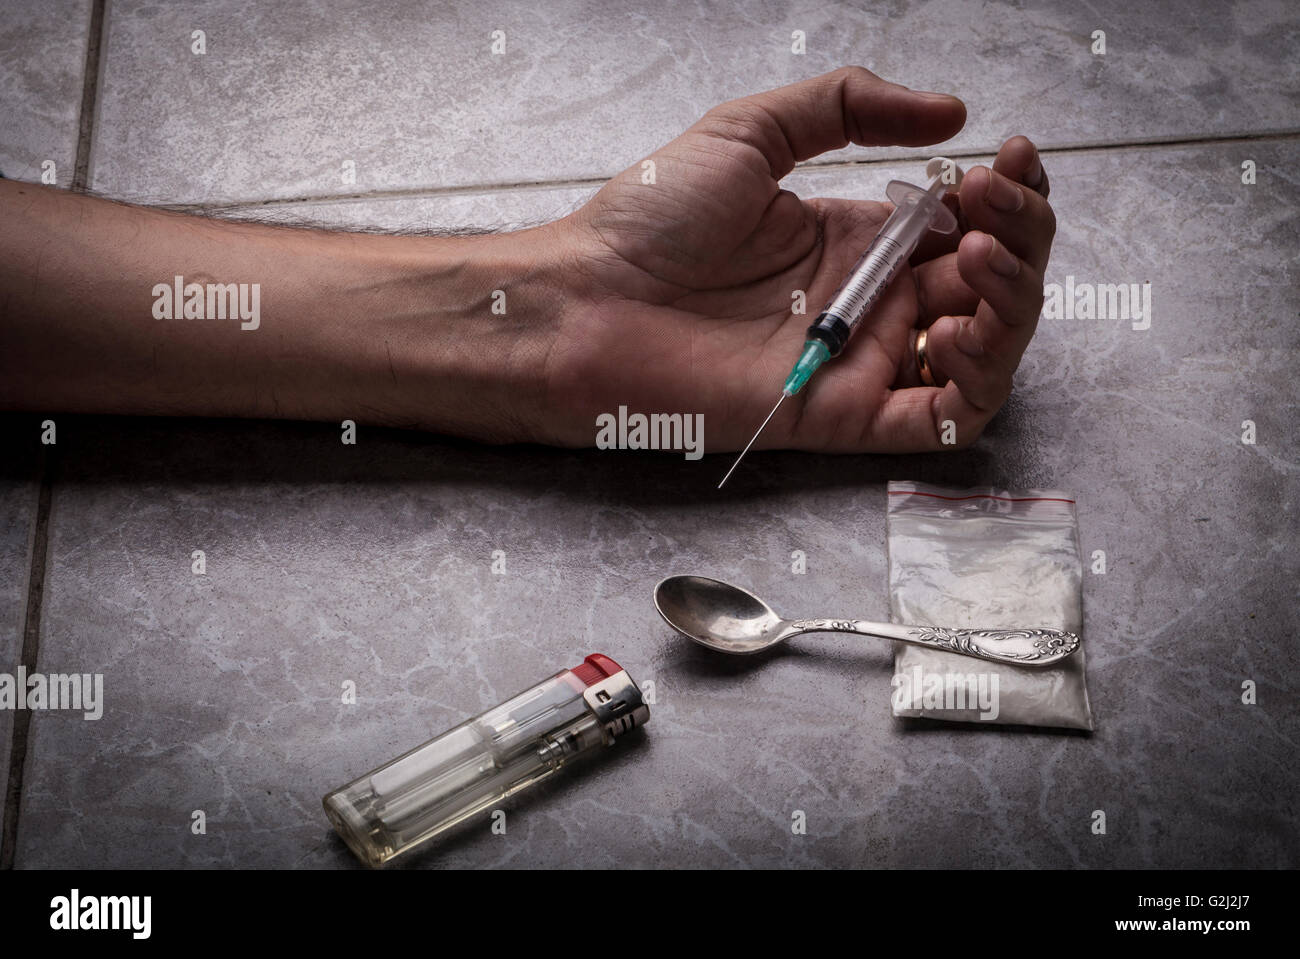 Drog Addict hand with syringe on the floor with a bag of drugs a spoon and a lighter Stock Photo